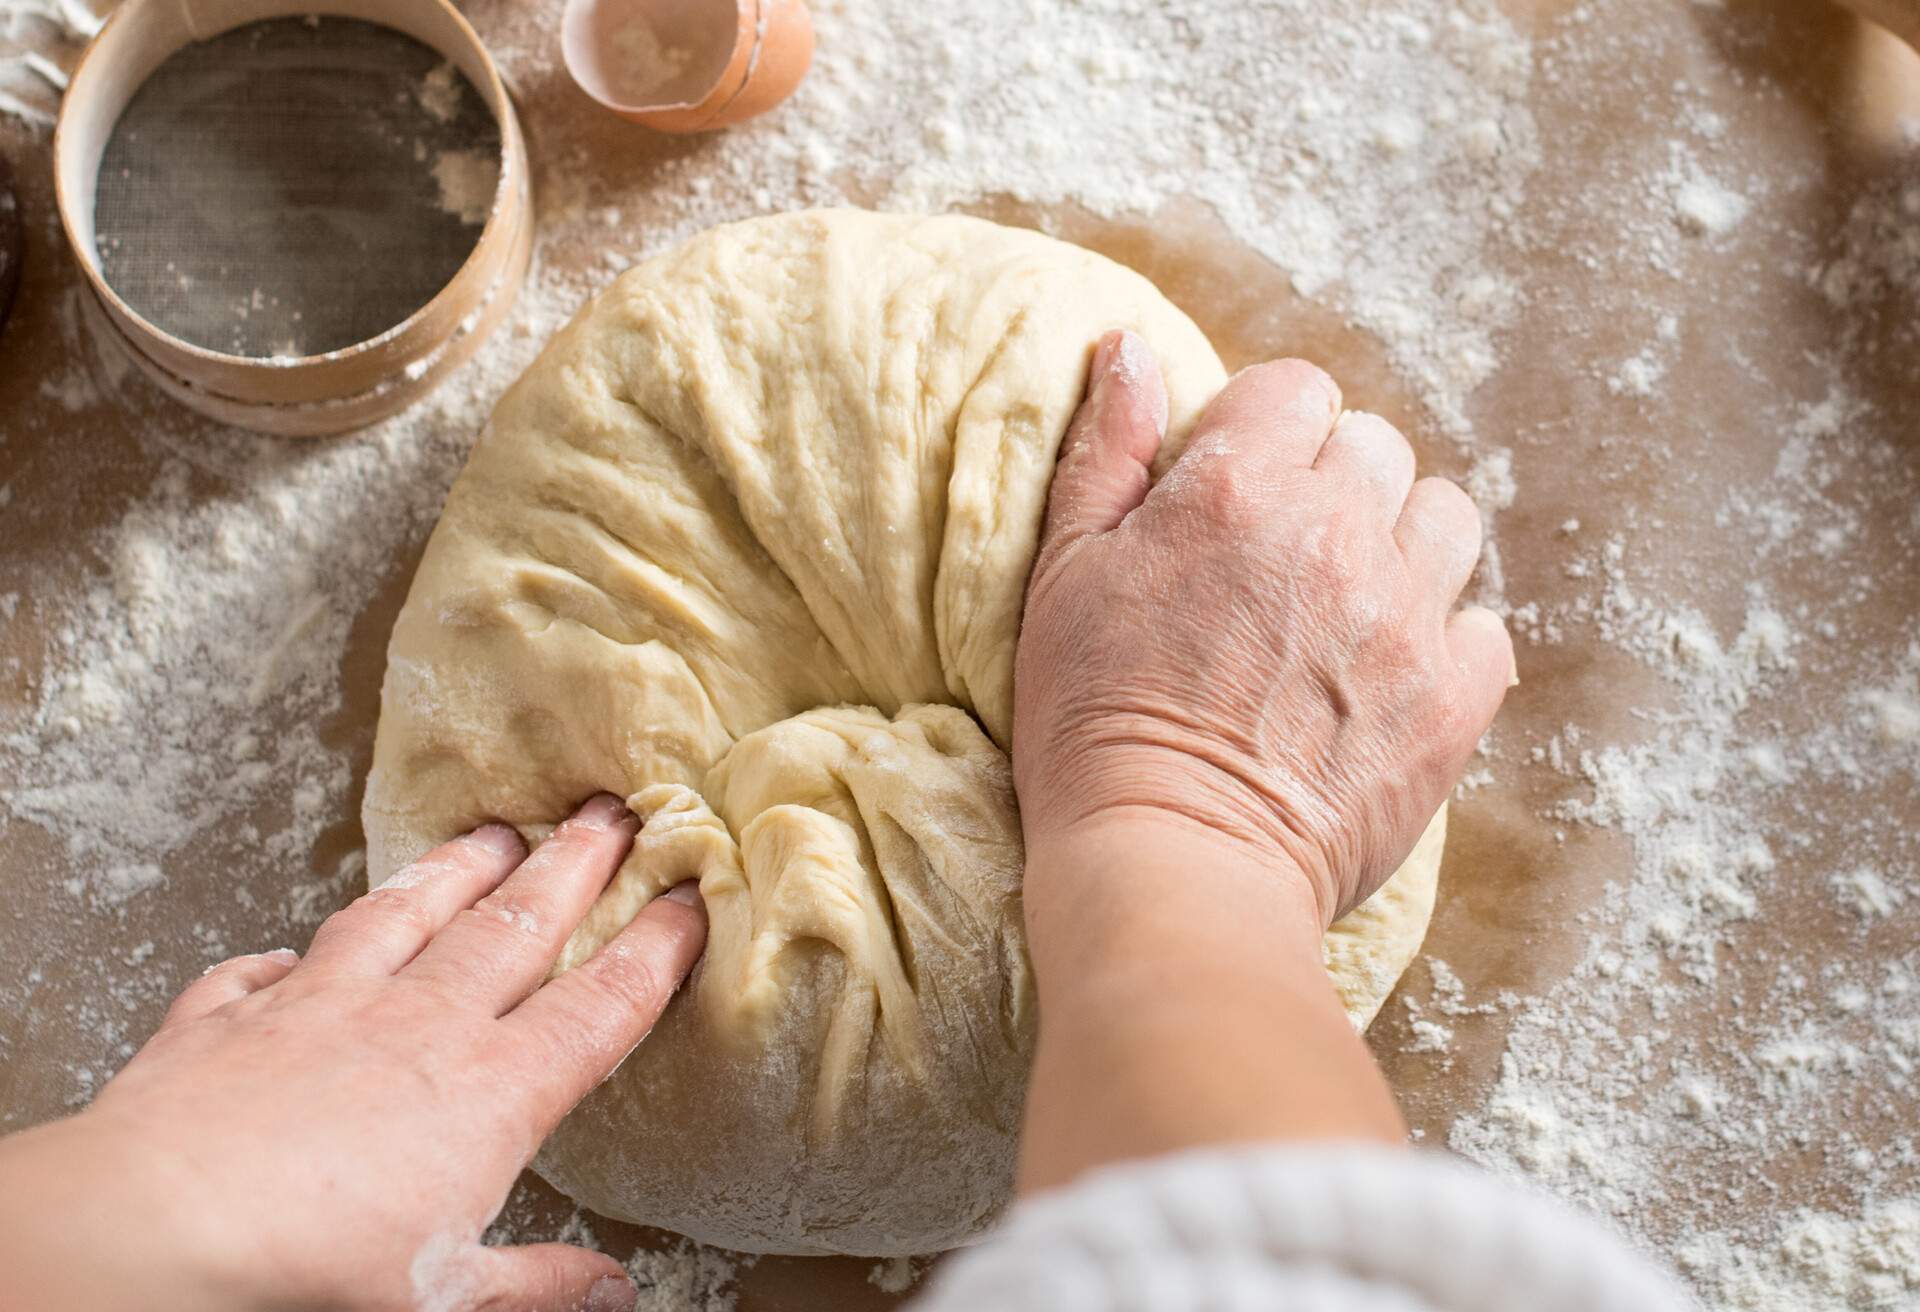 A pair of hands expertly kneading dough, with scattered flour on the work surface.